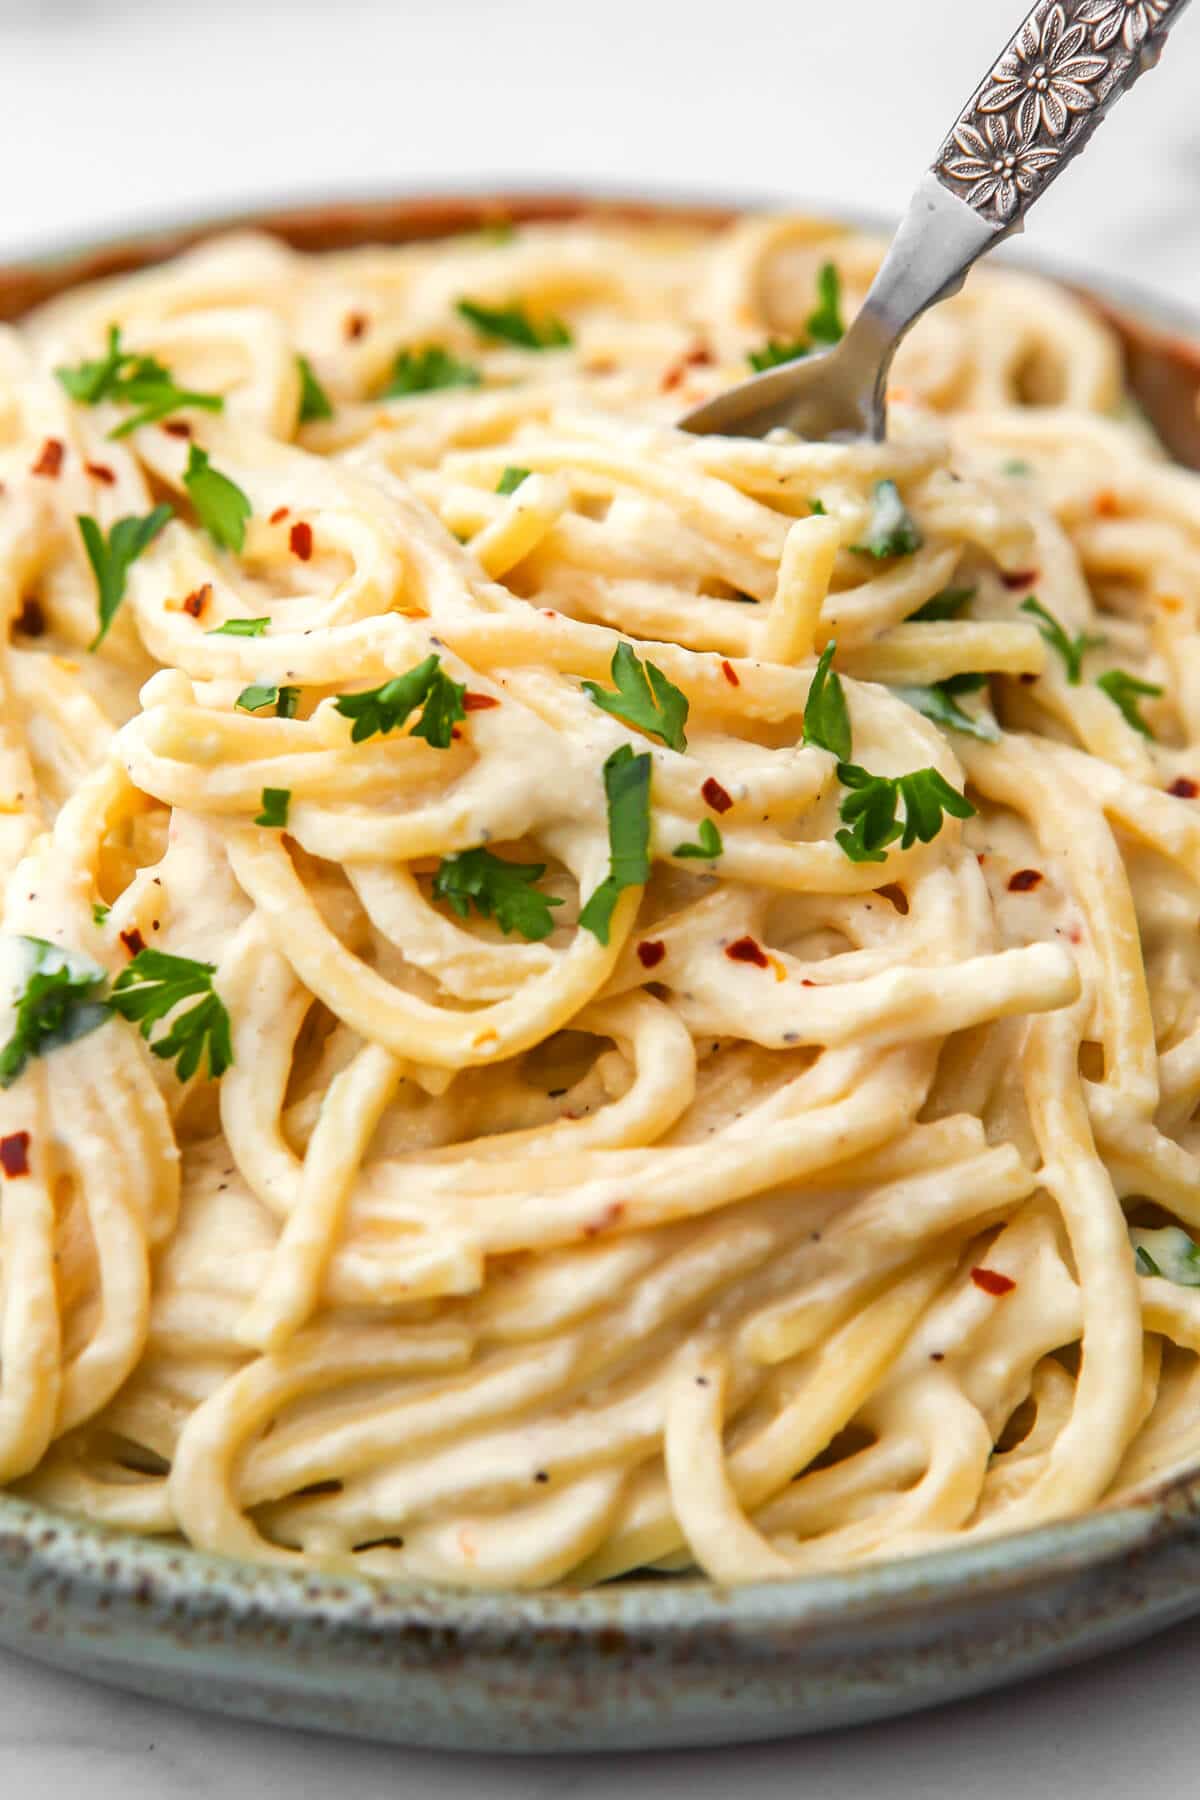 A close up of a plate of tofu cream sauce over pasta and sprinkled with fresh parsley.